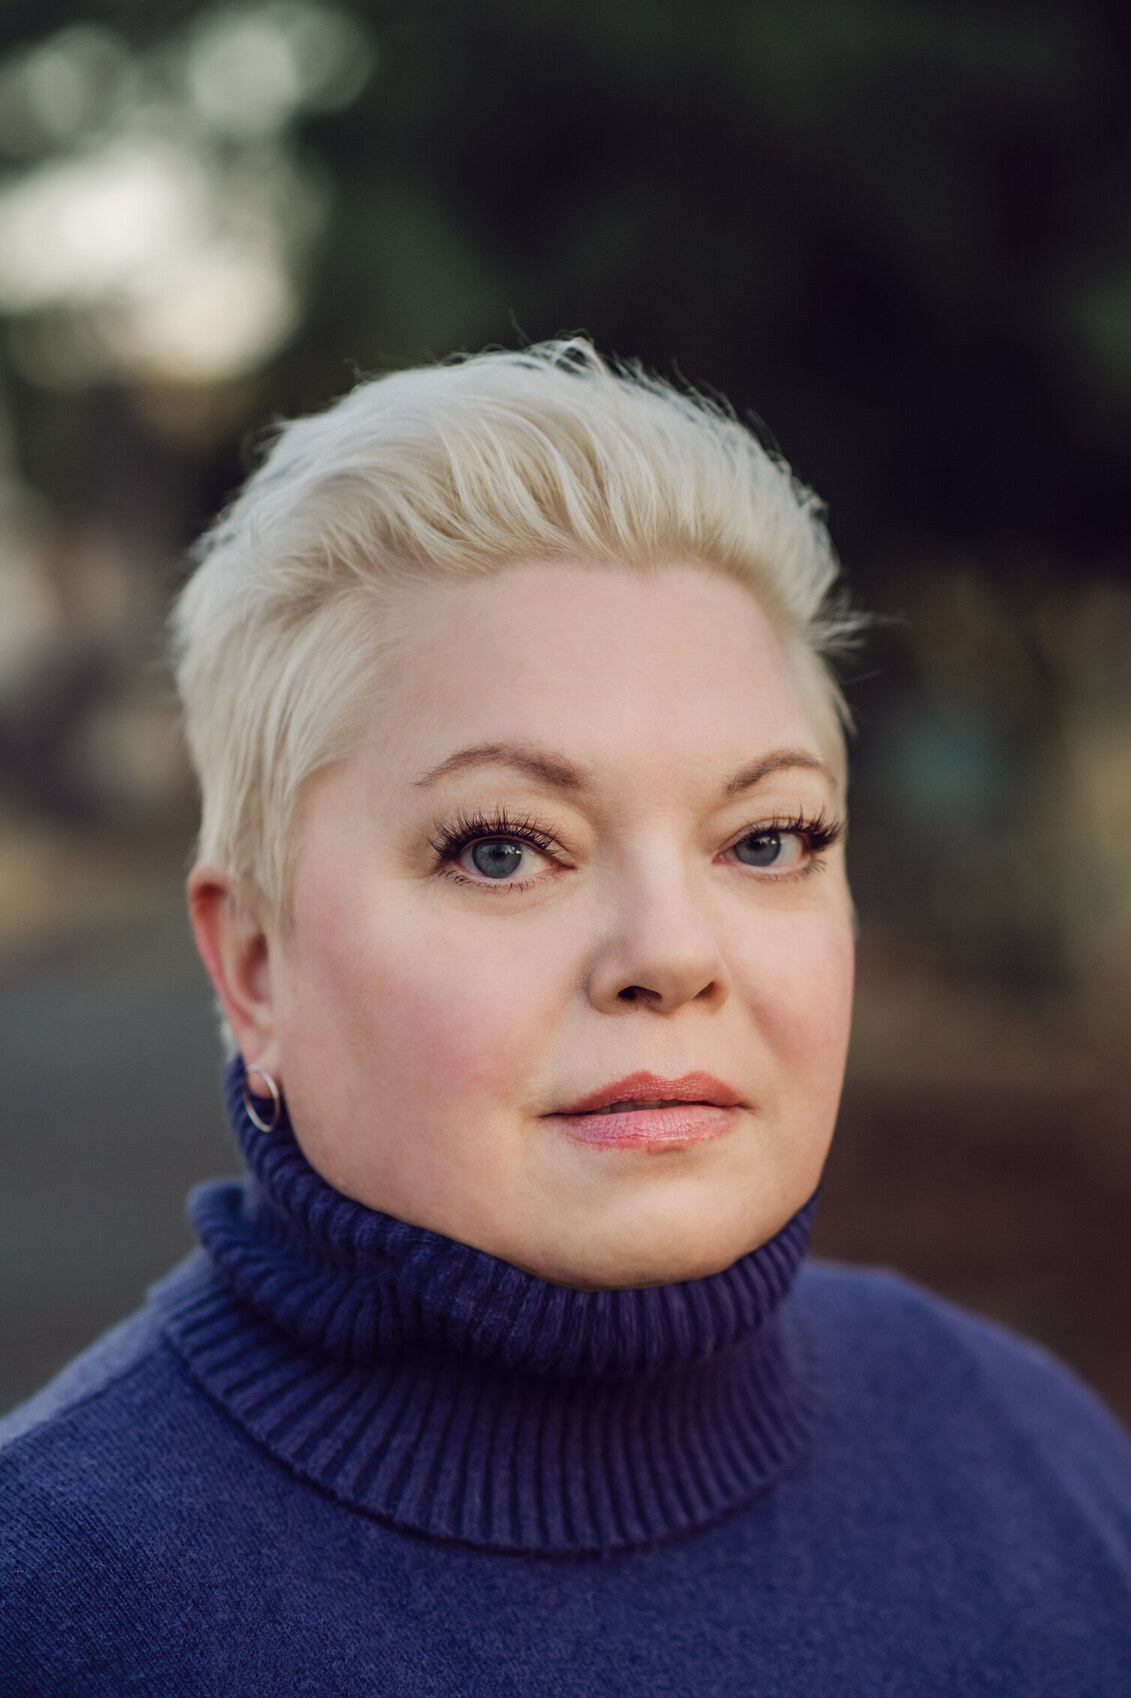 Headshot of a white woman with short blonde hair wearing a purple turtleneck sweater.